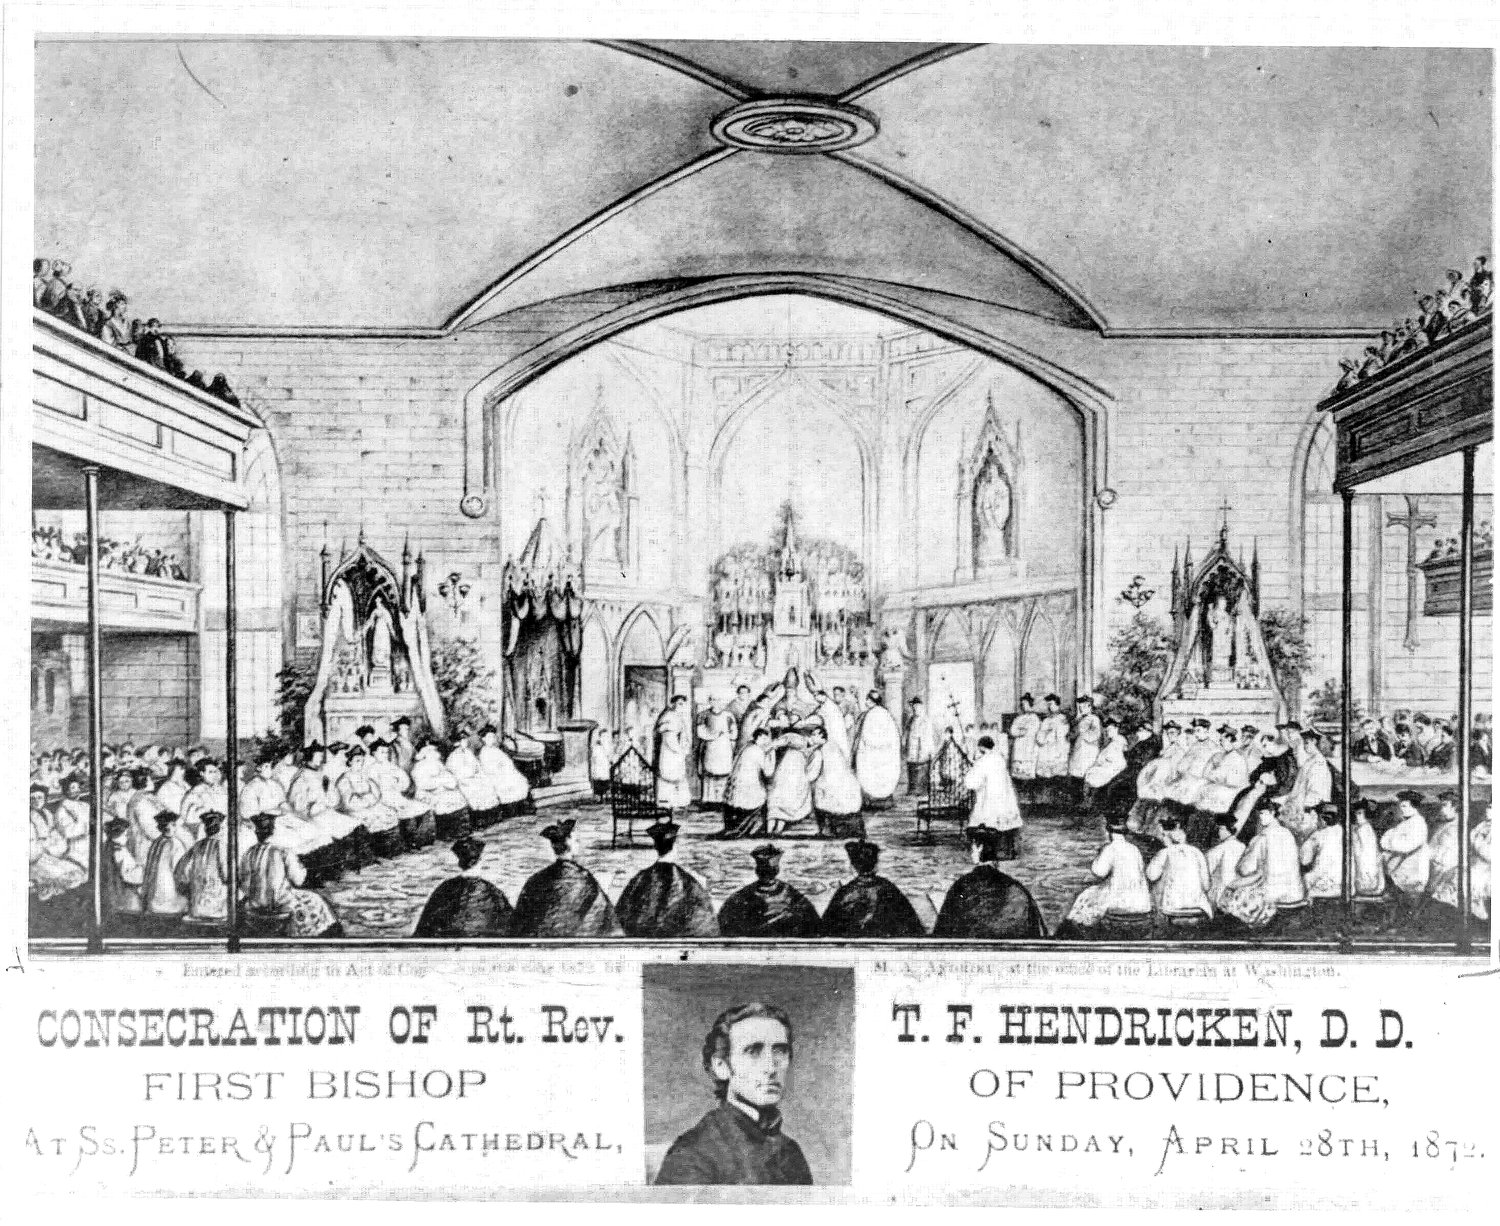 A drawing depicts the consecration of the first bishop of Providence, Thomas F. Hendricken on April 28, 1872.